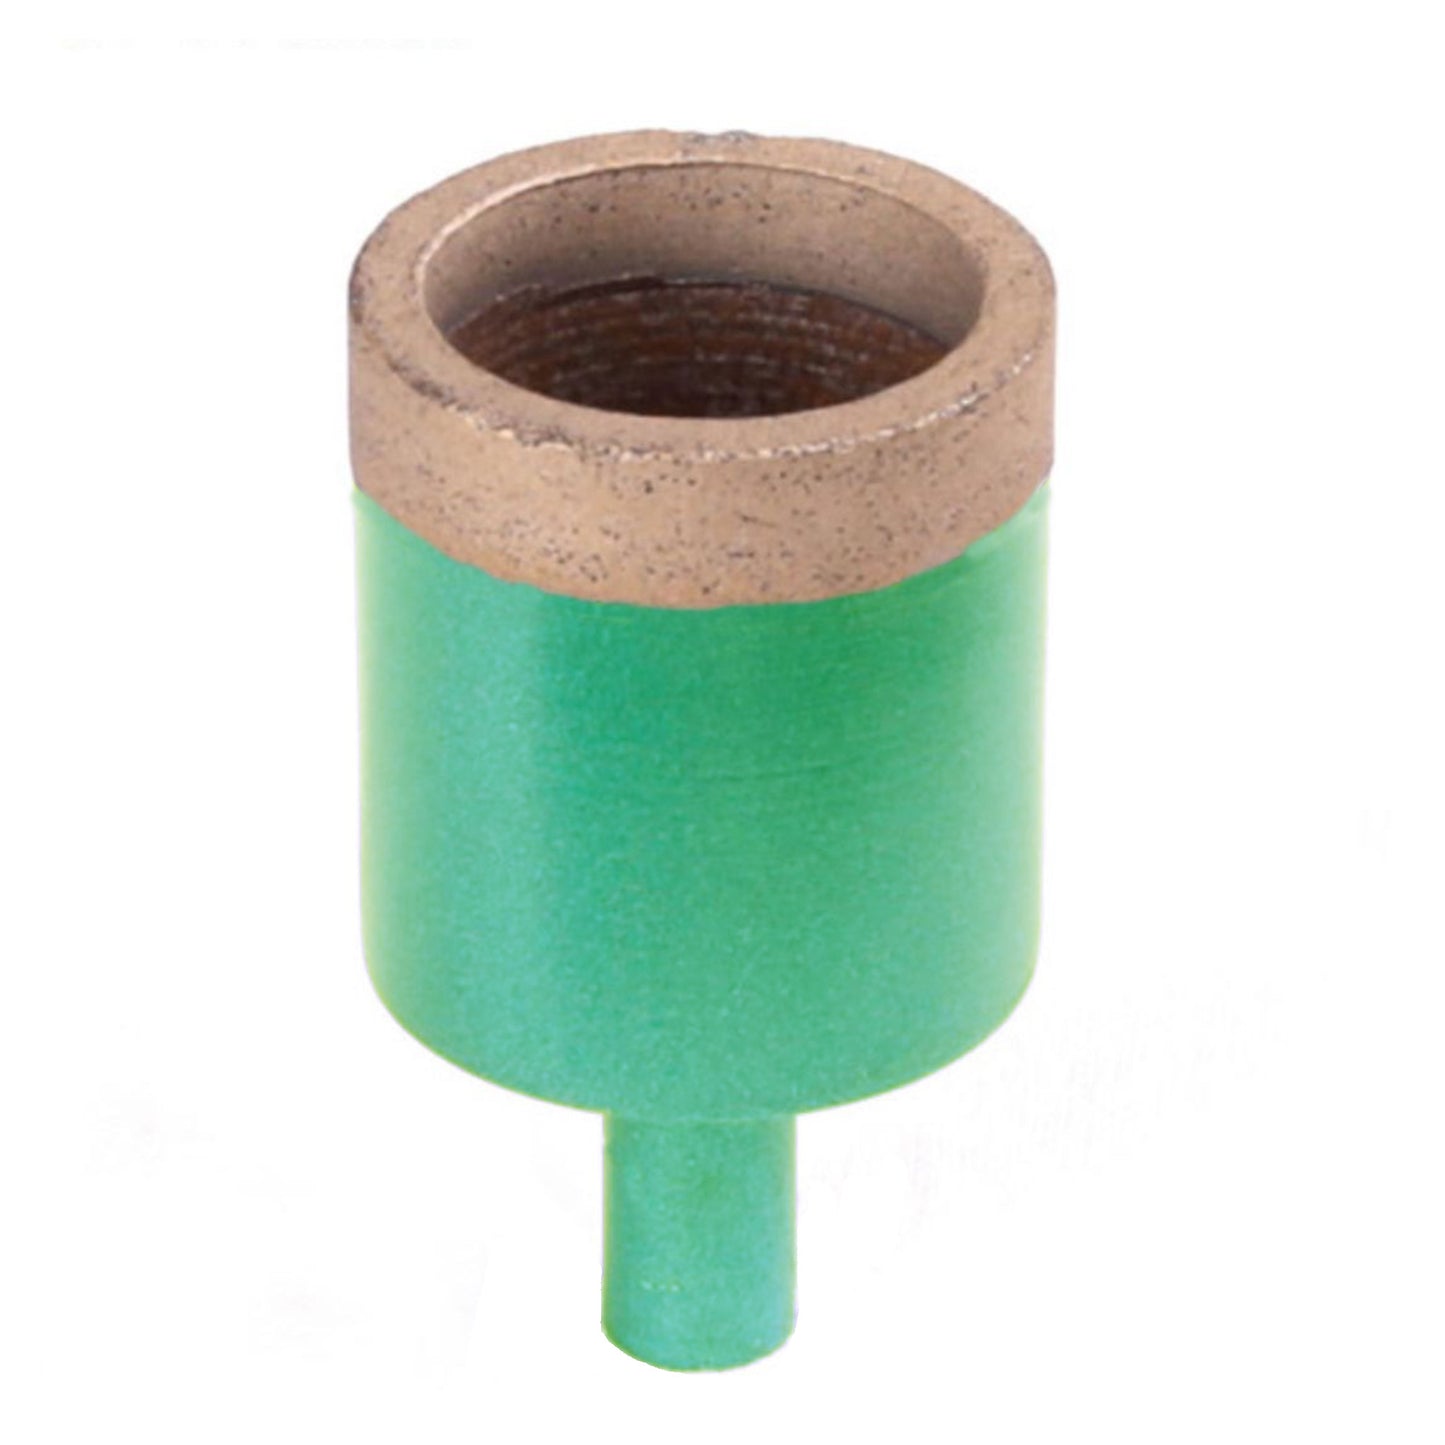 10mm - Grinding Cup